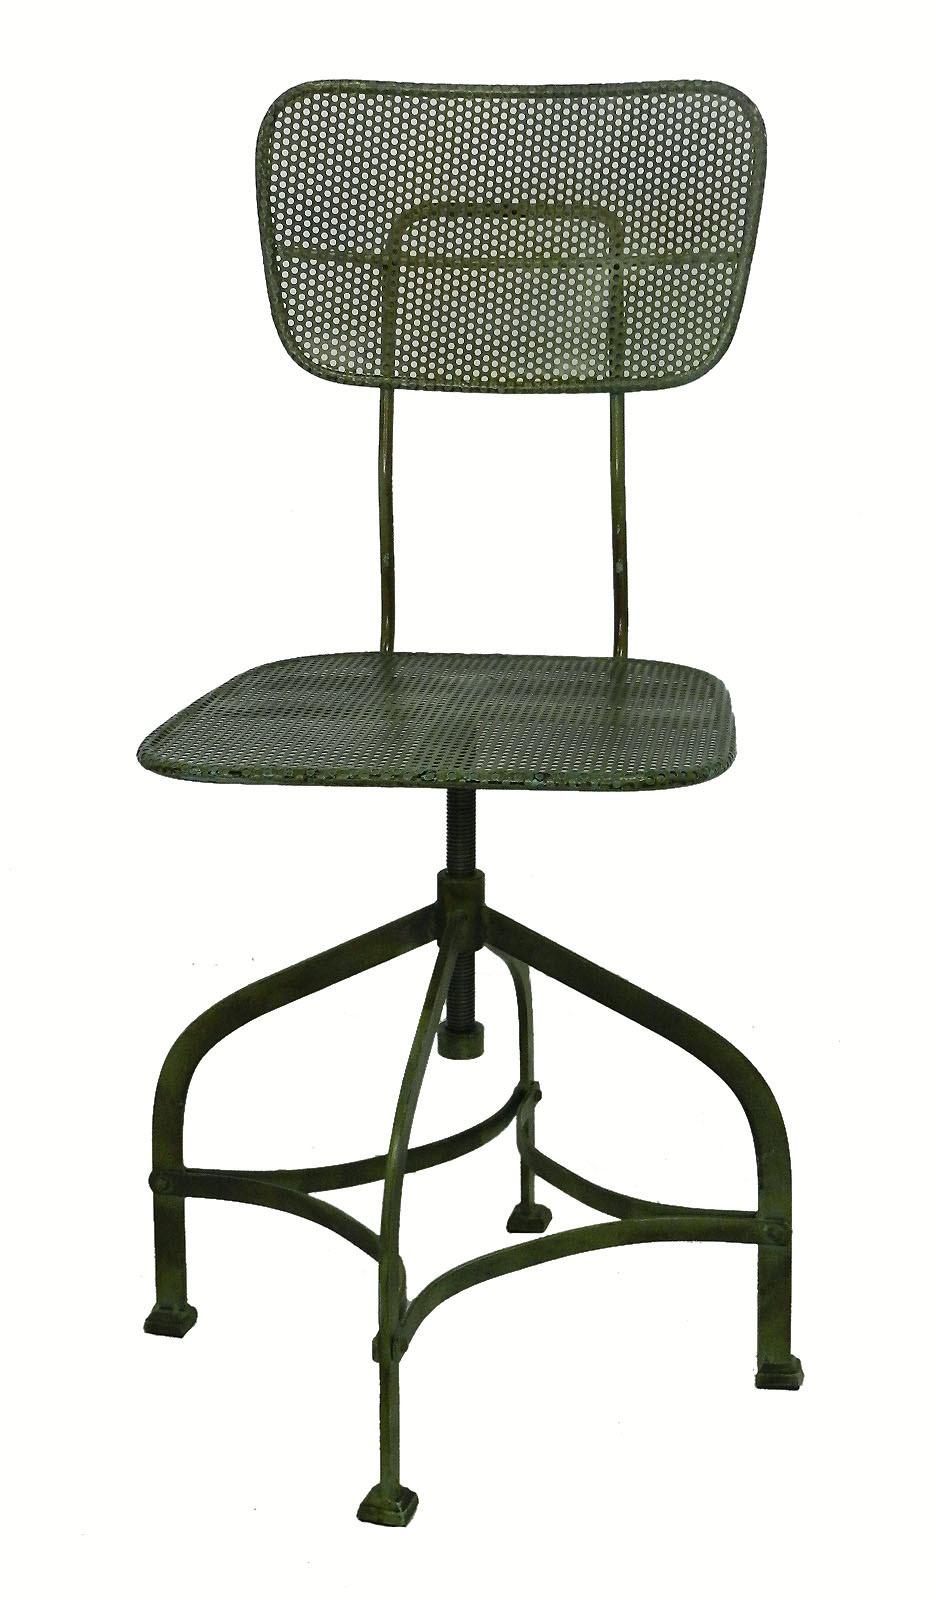 Revolving architects chair mesh metal Mategot style
Adjustable height
Original paint with great patina.